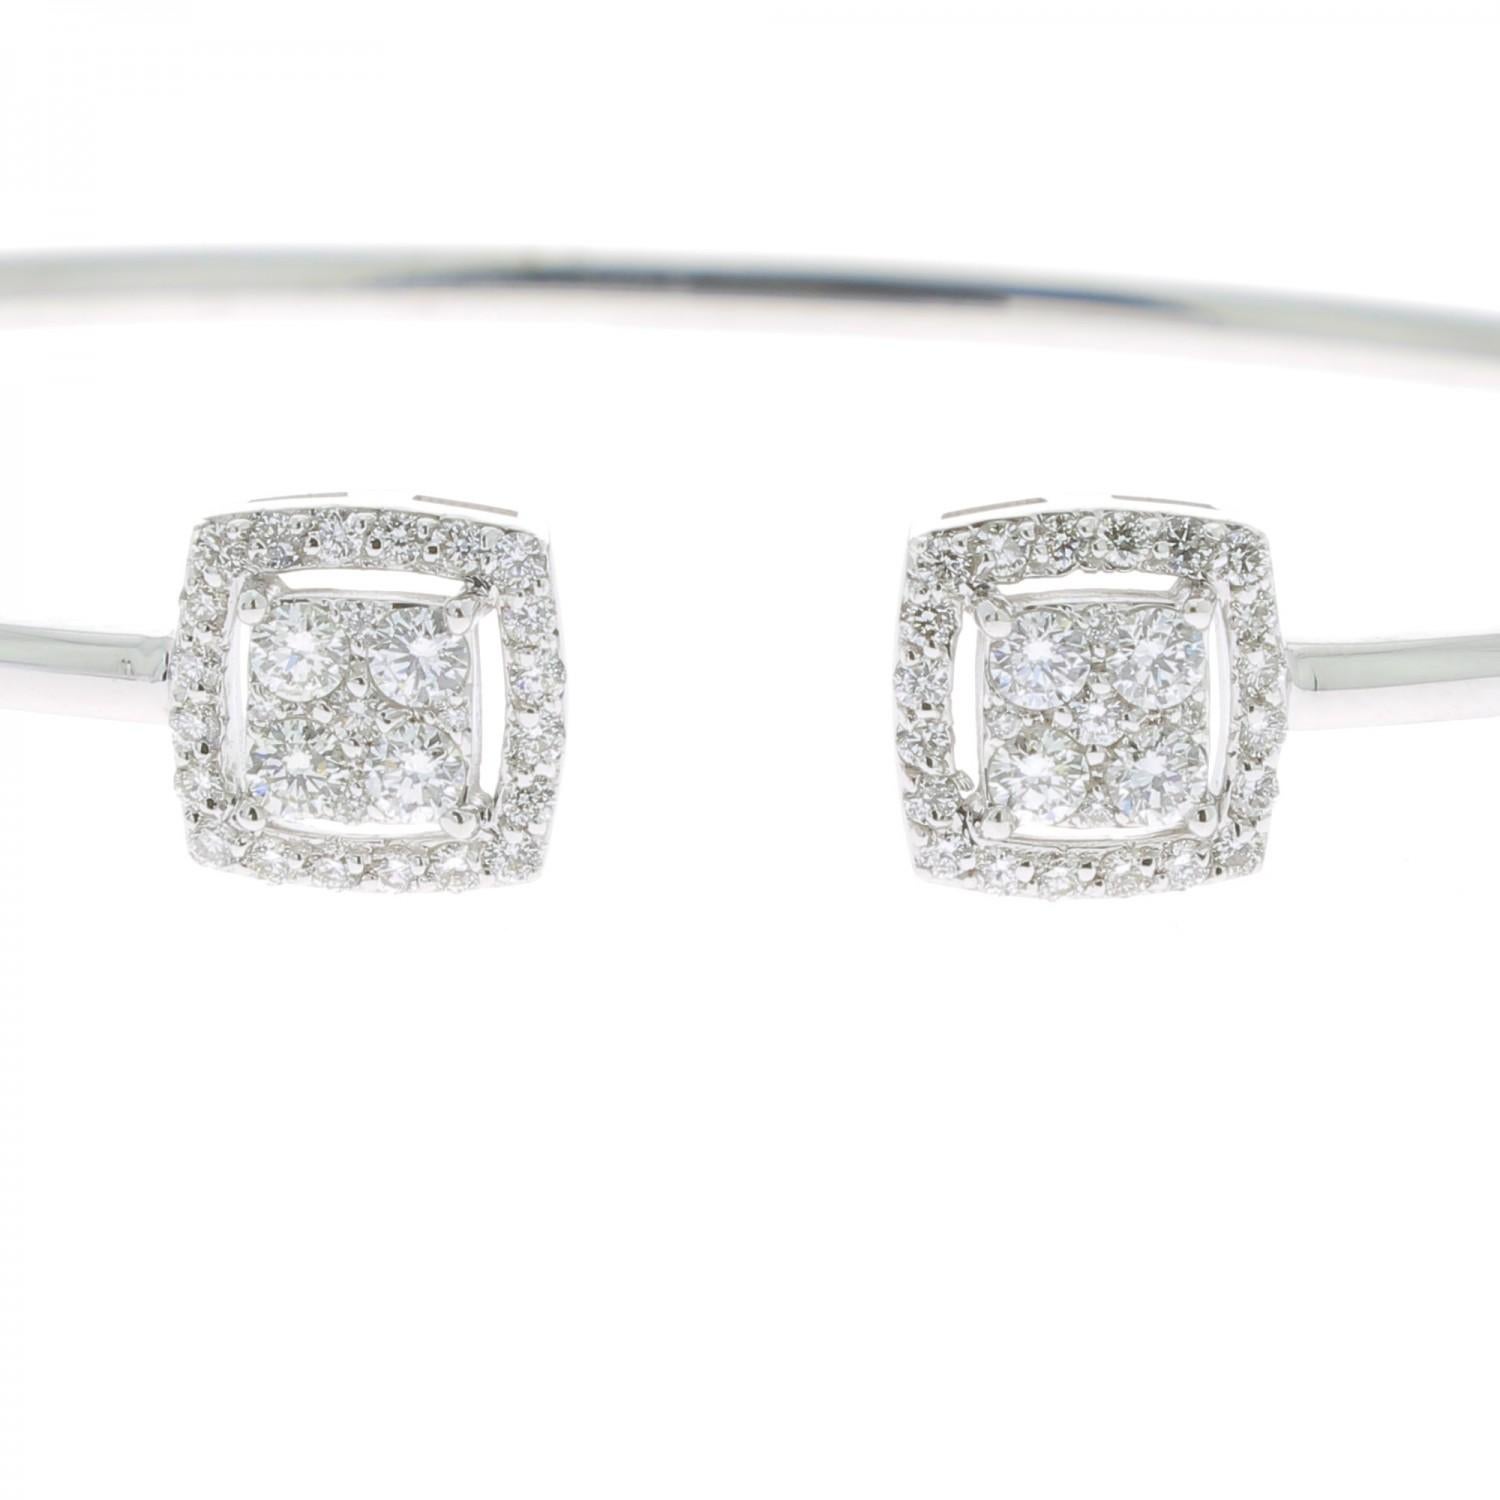 A wonderful Diamond Bangles Bracelet set with Round Diamonds weighing 0.61 Carats.
The Diamonds are GVS quality.
The Bangle Bracelet is 18K White Gold.
The Diamond Bracelet weight 4.20 Grams.
The Diameter of the Bracelet is 5.5 Cm/ 2.16 In. 
